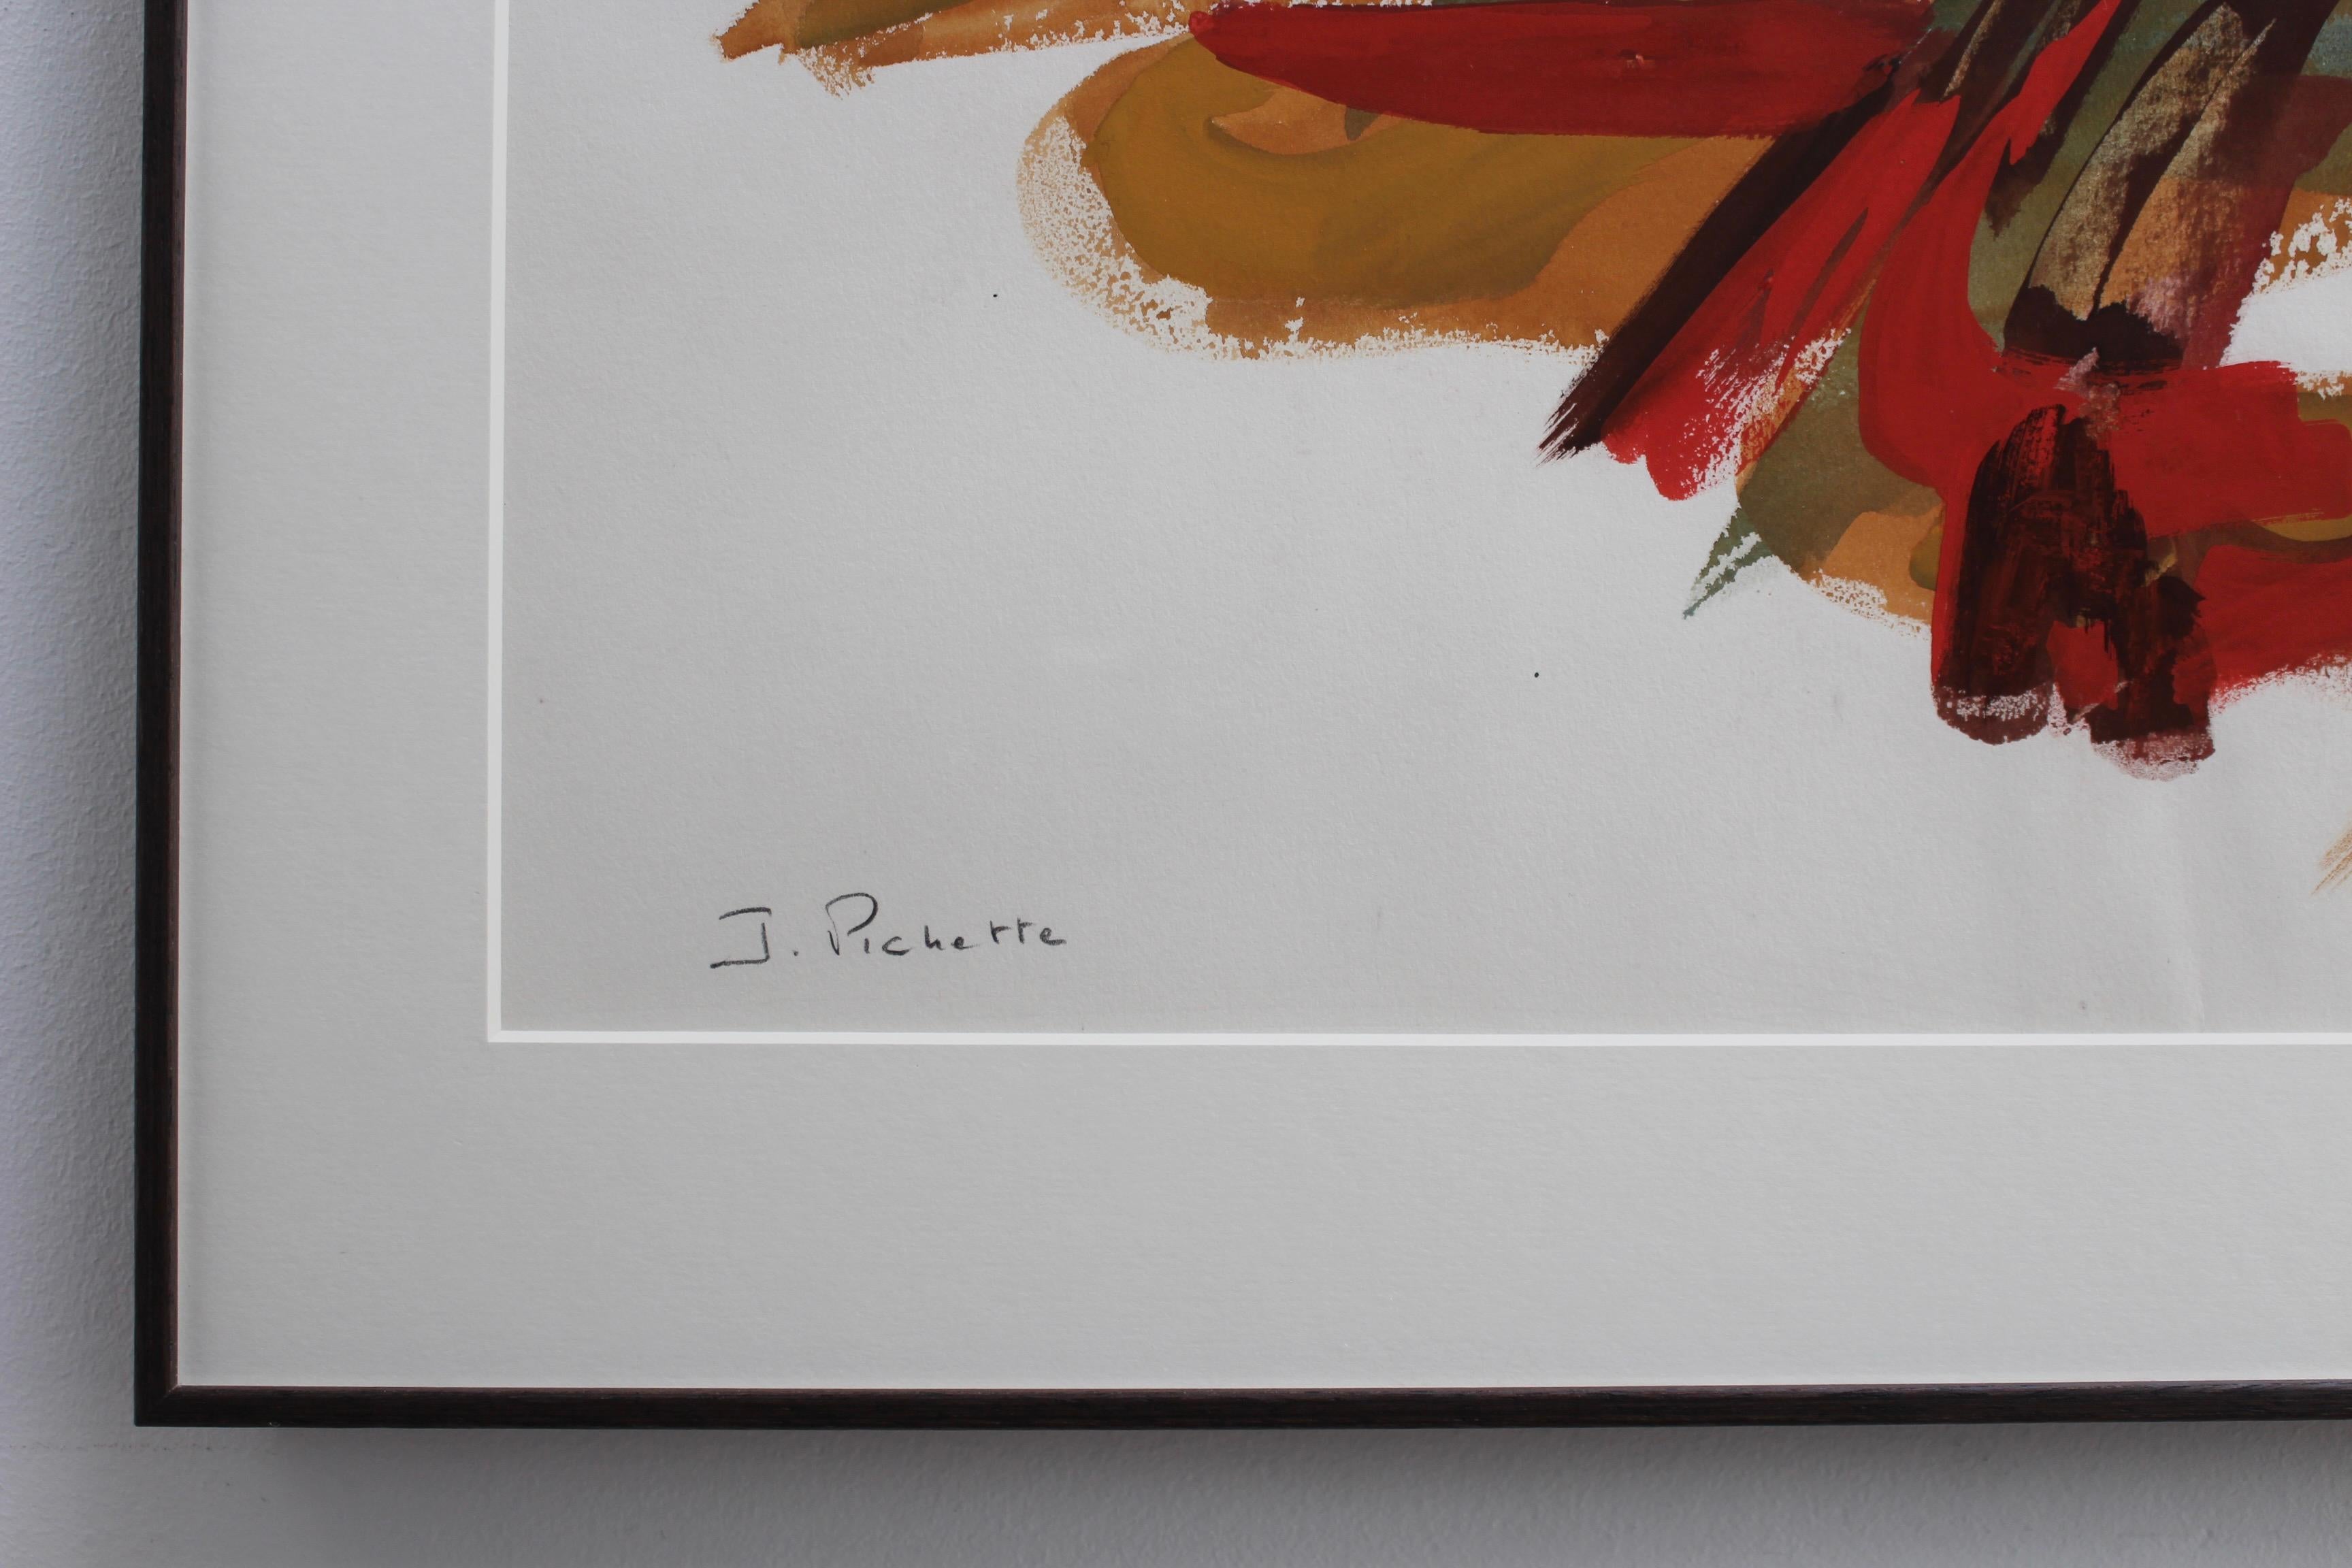 Composition in Orange and Red - Brown Abstract Drawing by James Pichette